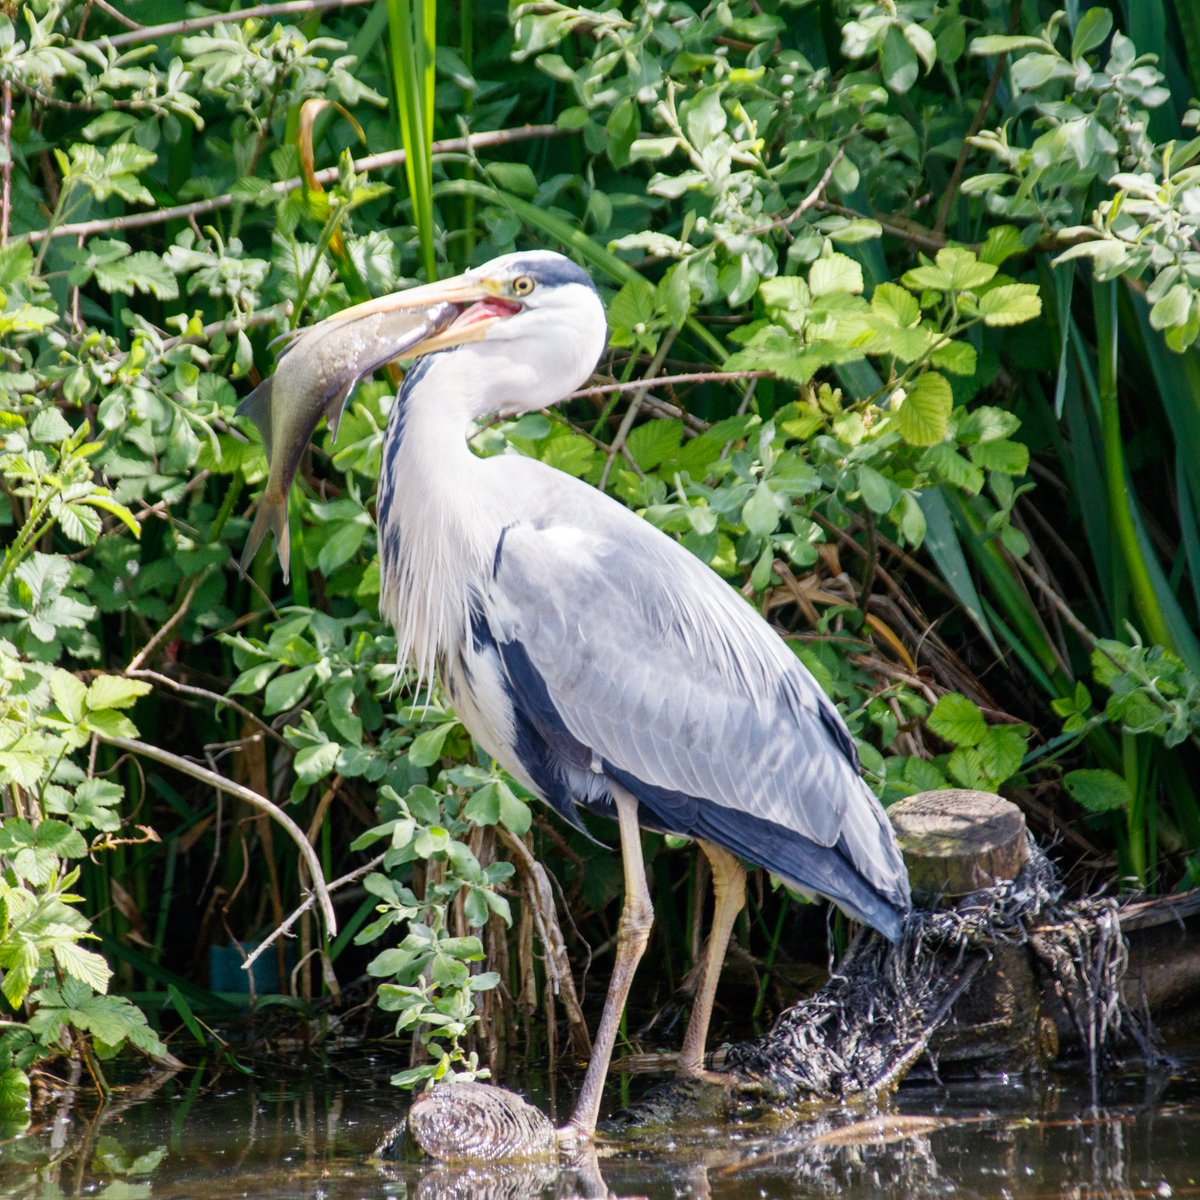 He's putting the local fishermen to shame, #heron with his lunch today on #DudleyNo2Canal. #BoatsThatTweet #KeepCanalsAlive #LifesBetterByWater #FundBritainsWaterways #BCN #BCNS #WildlifePhotography #BoatLife @canalrivertrust @CRTWestMidlands  waterways.photography